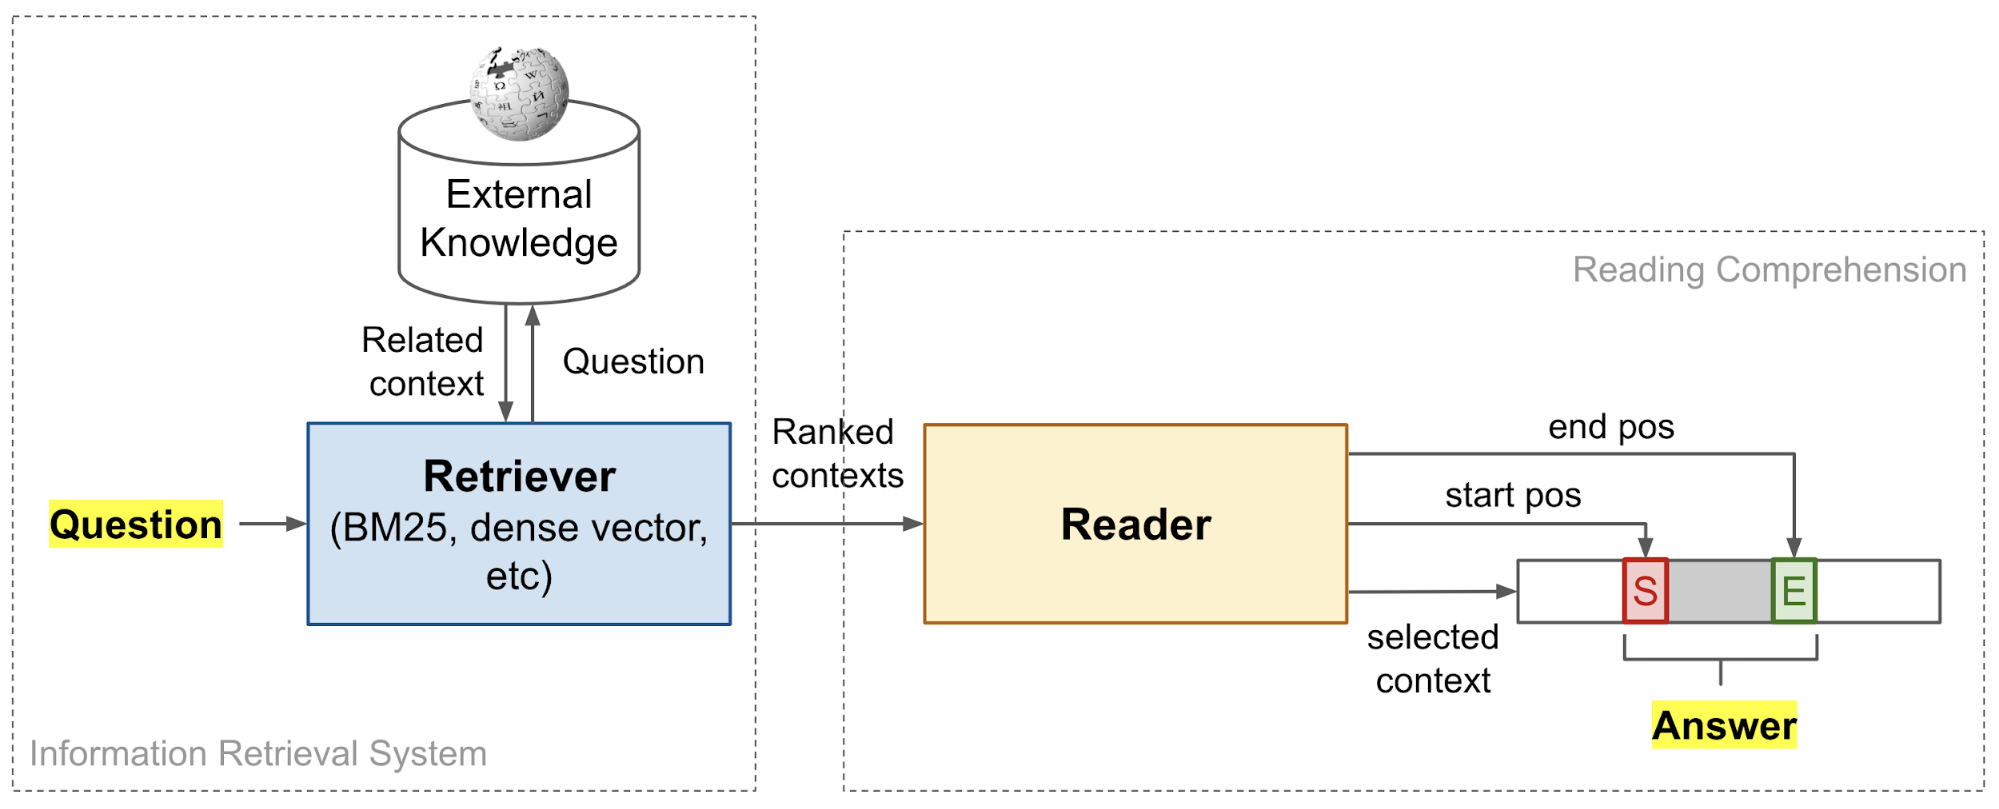 The retriever-reader QA framework combines information retrieval with machine reading comprehension. Source: https://lilianweng.github.io/lil-log/2020/10/29/open-domain-question-answering.html